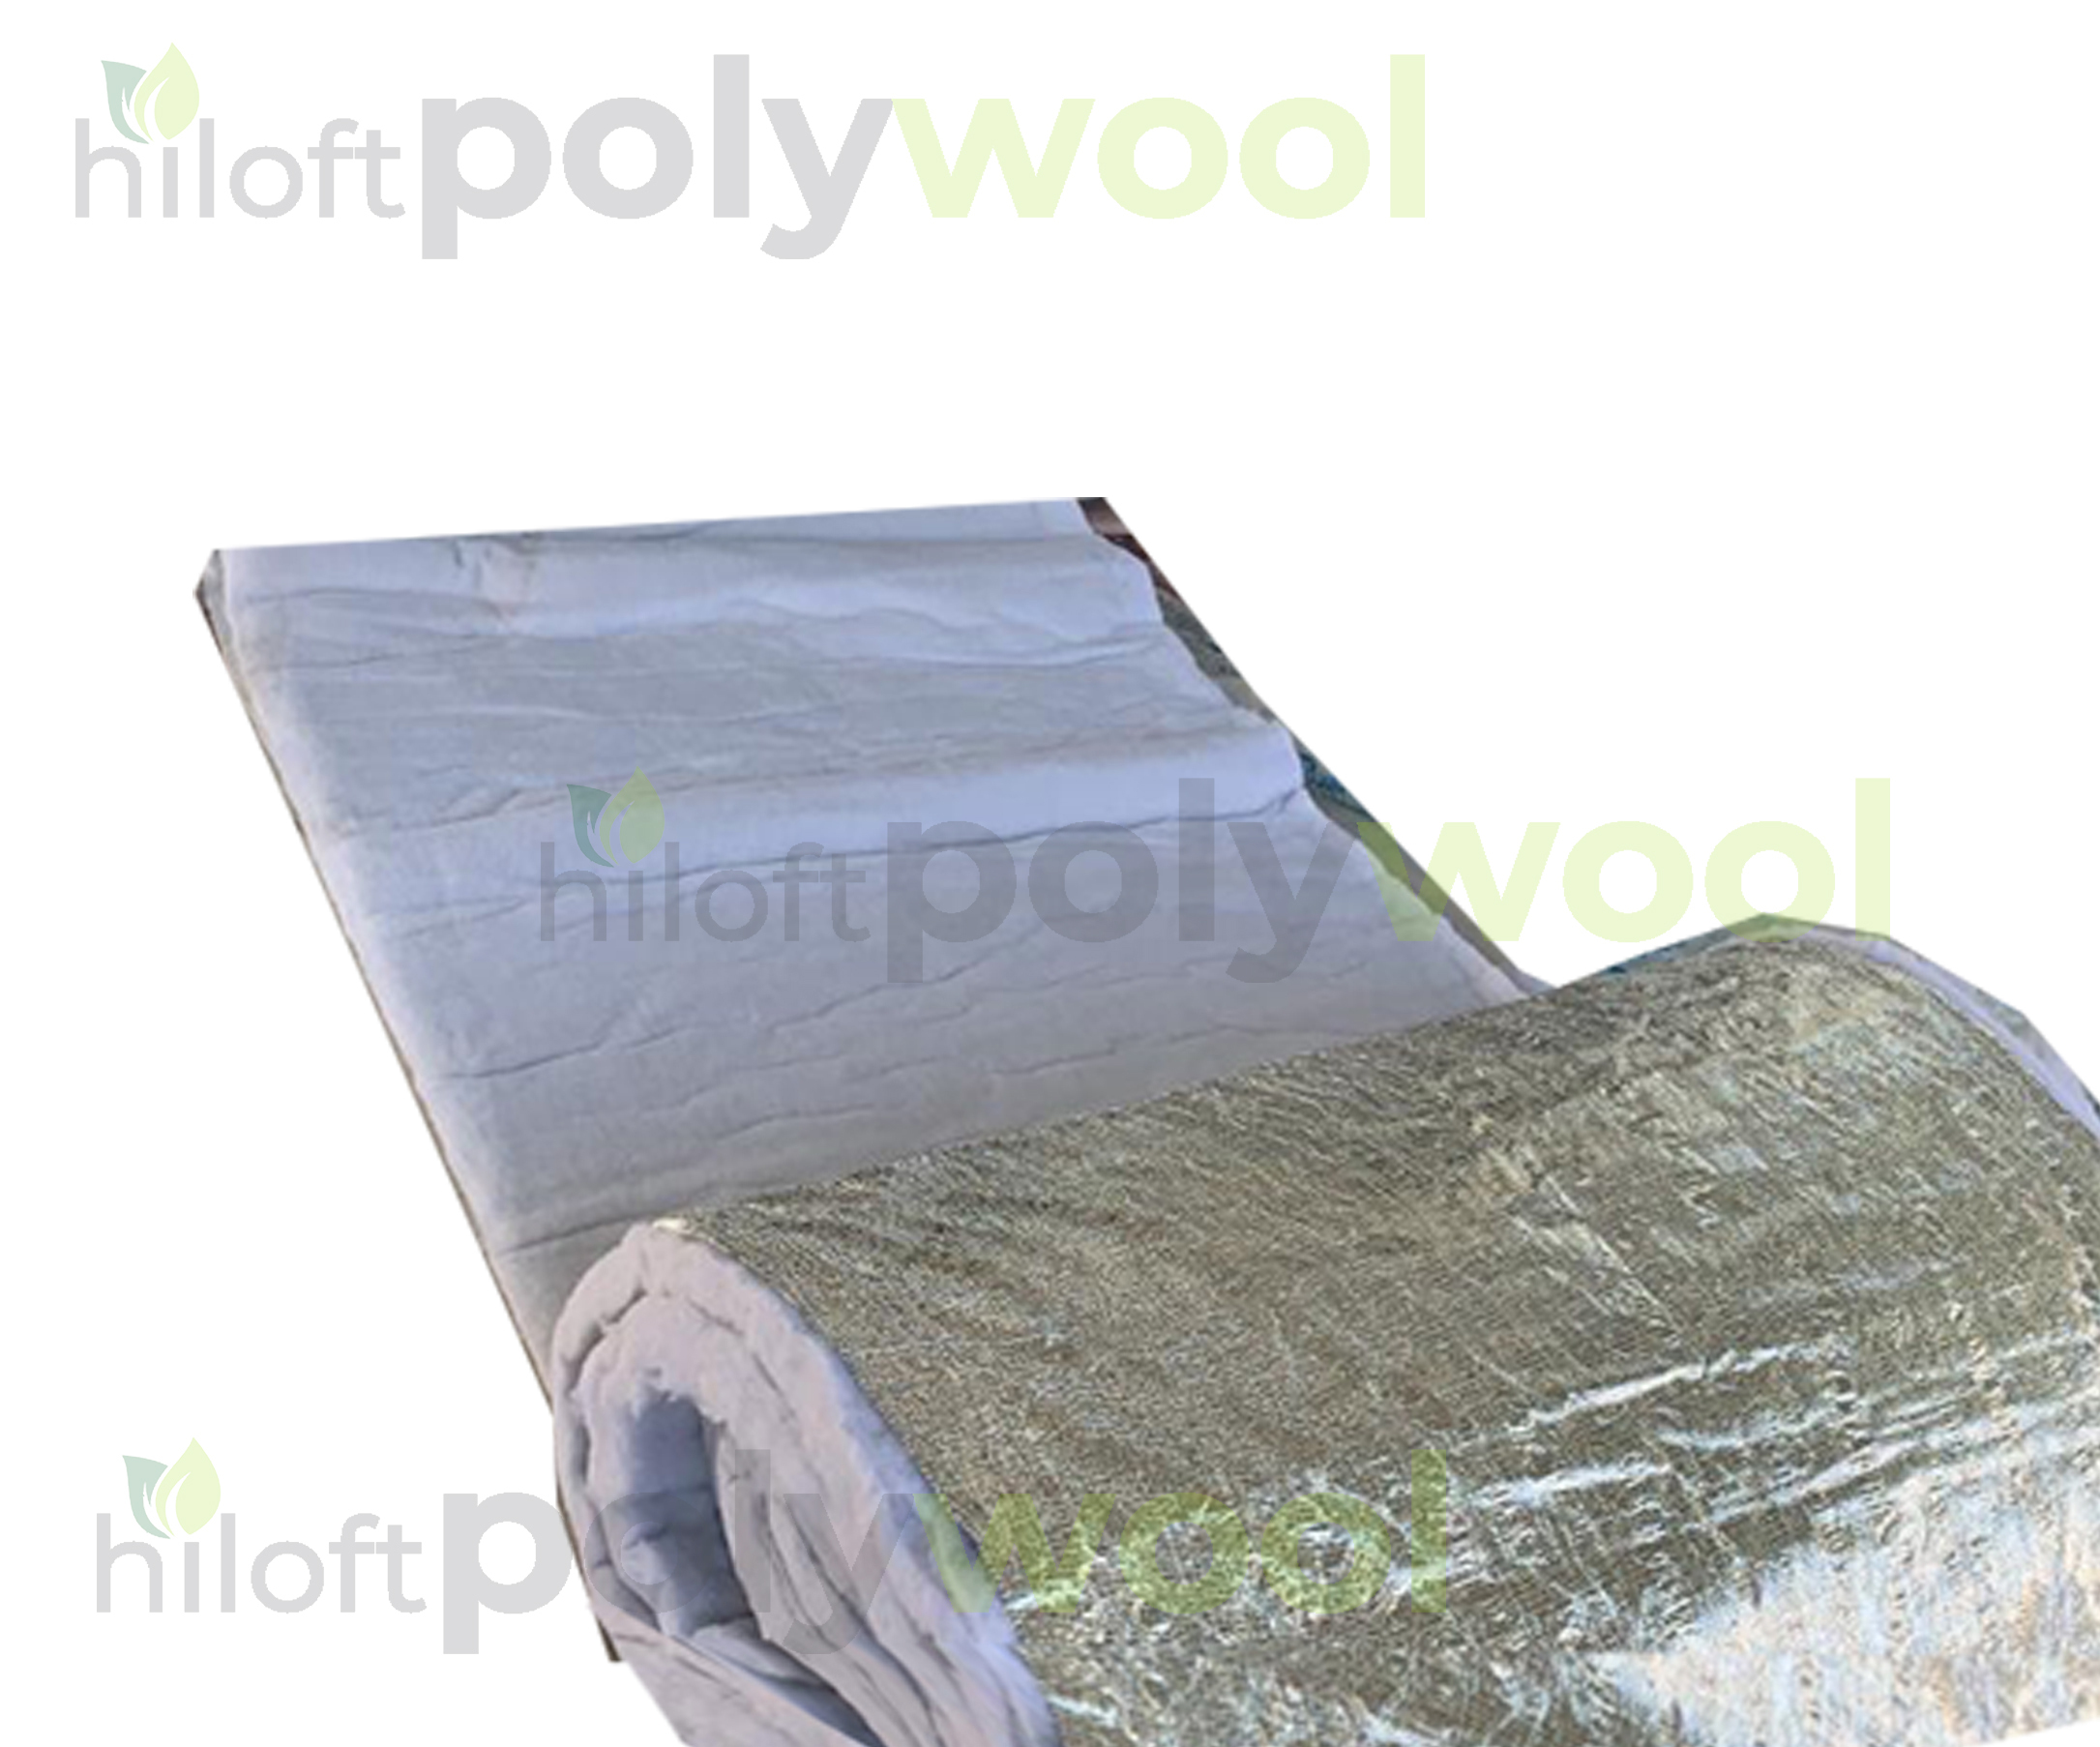 POLYWOOL 40kg/25MM with foil